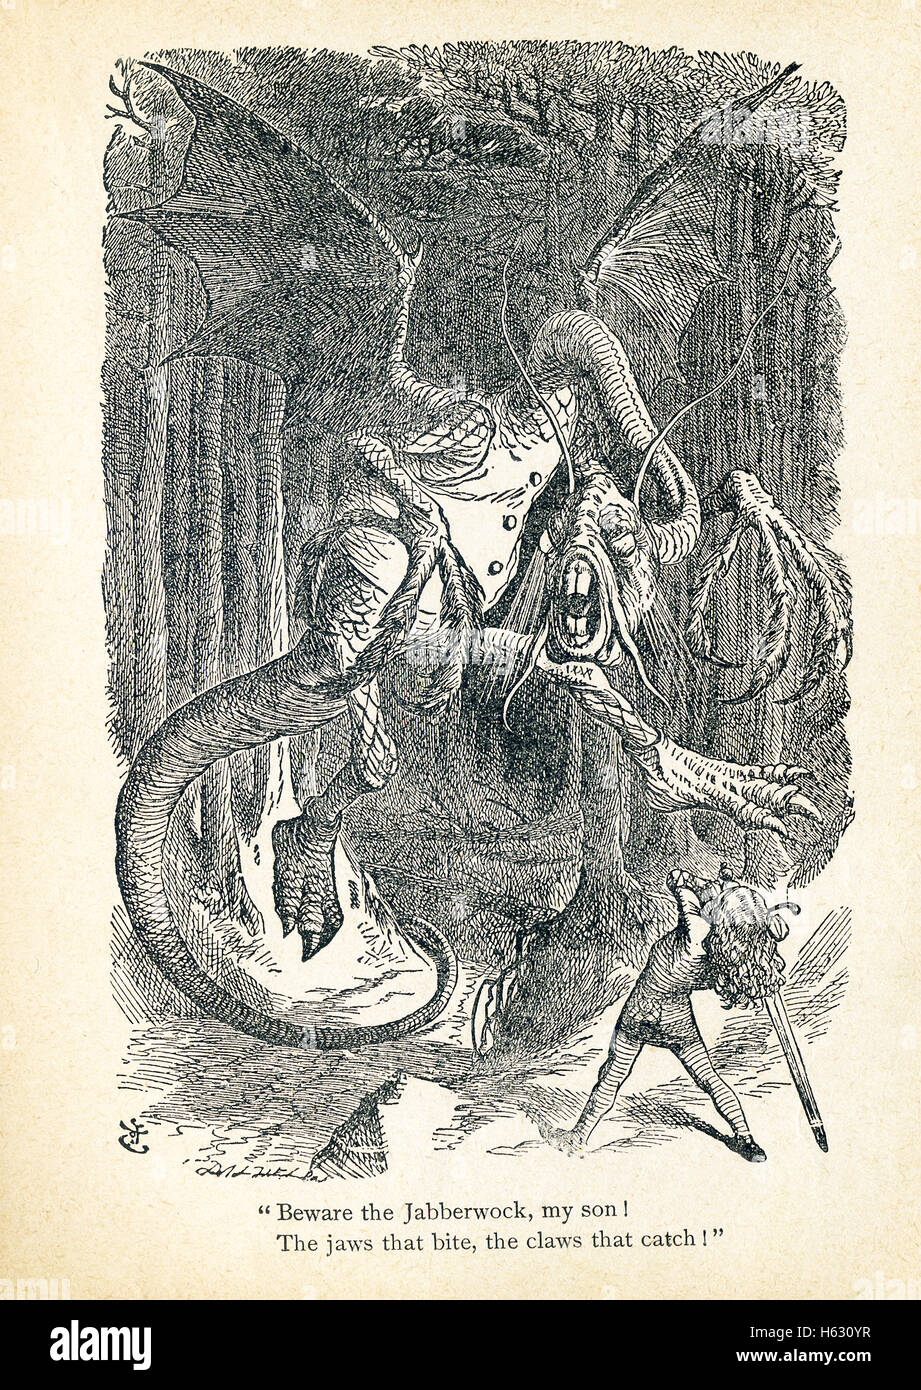 This is a scene from what Alice saw once she went through the Looking Glass and into the Looking Glass room in Lewis Carroll's 'Through the Looking Glass.' It shows the Jabberwock, and the caption reads, 'Beware the Jabberwock, my son! The jaws that bite, the claws that catch.' The Jabberwock is a monster, and the nonsense poem about killing this monster is called 'Jabberwocky.' Stock Photo